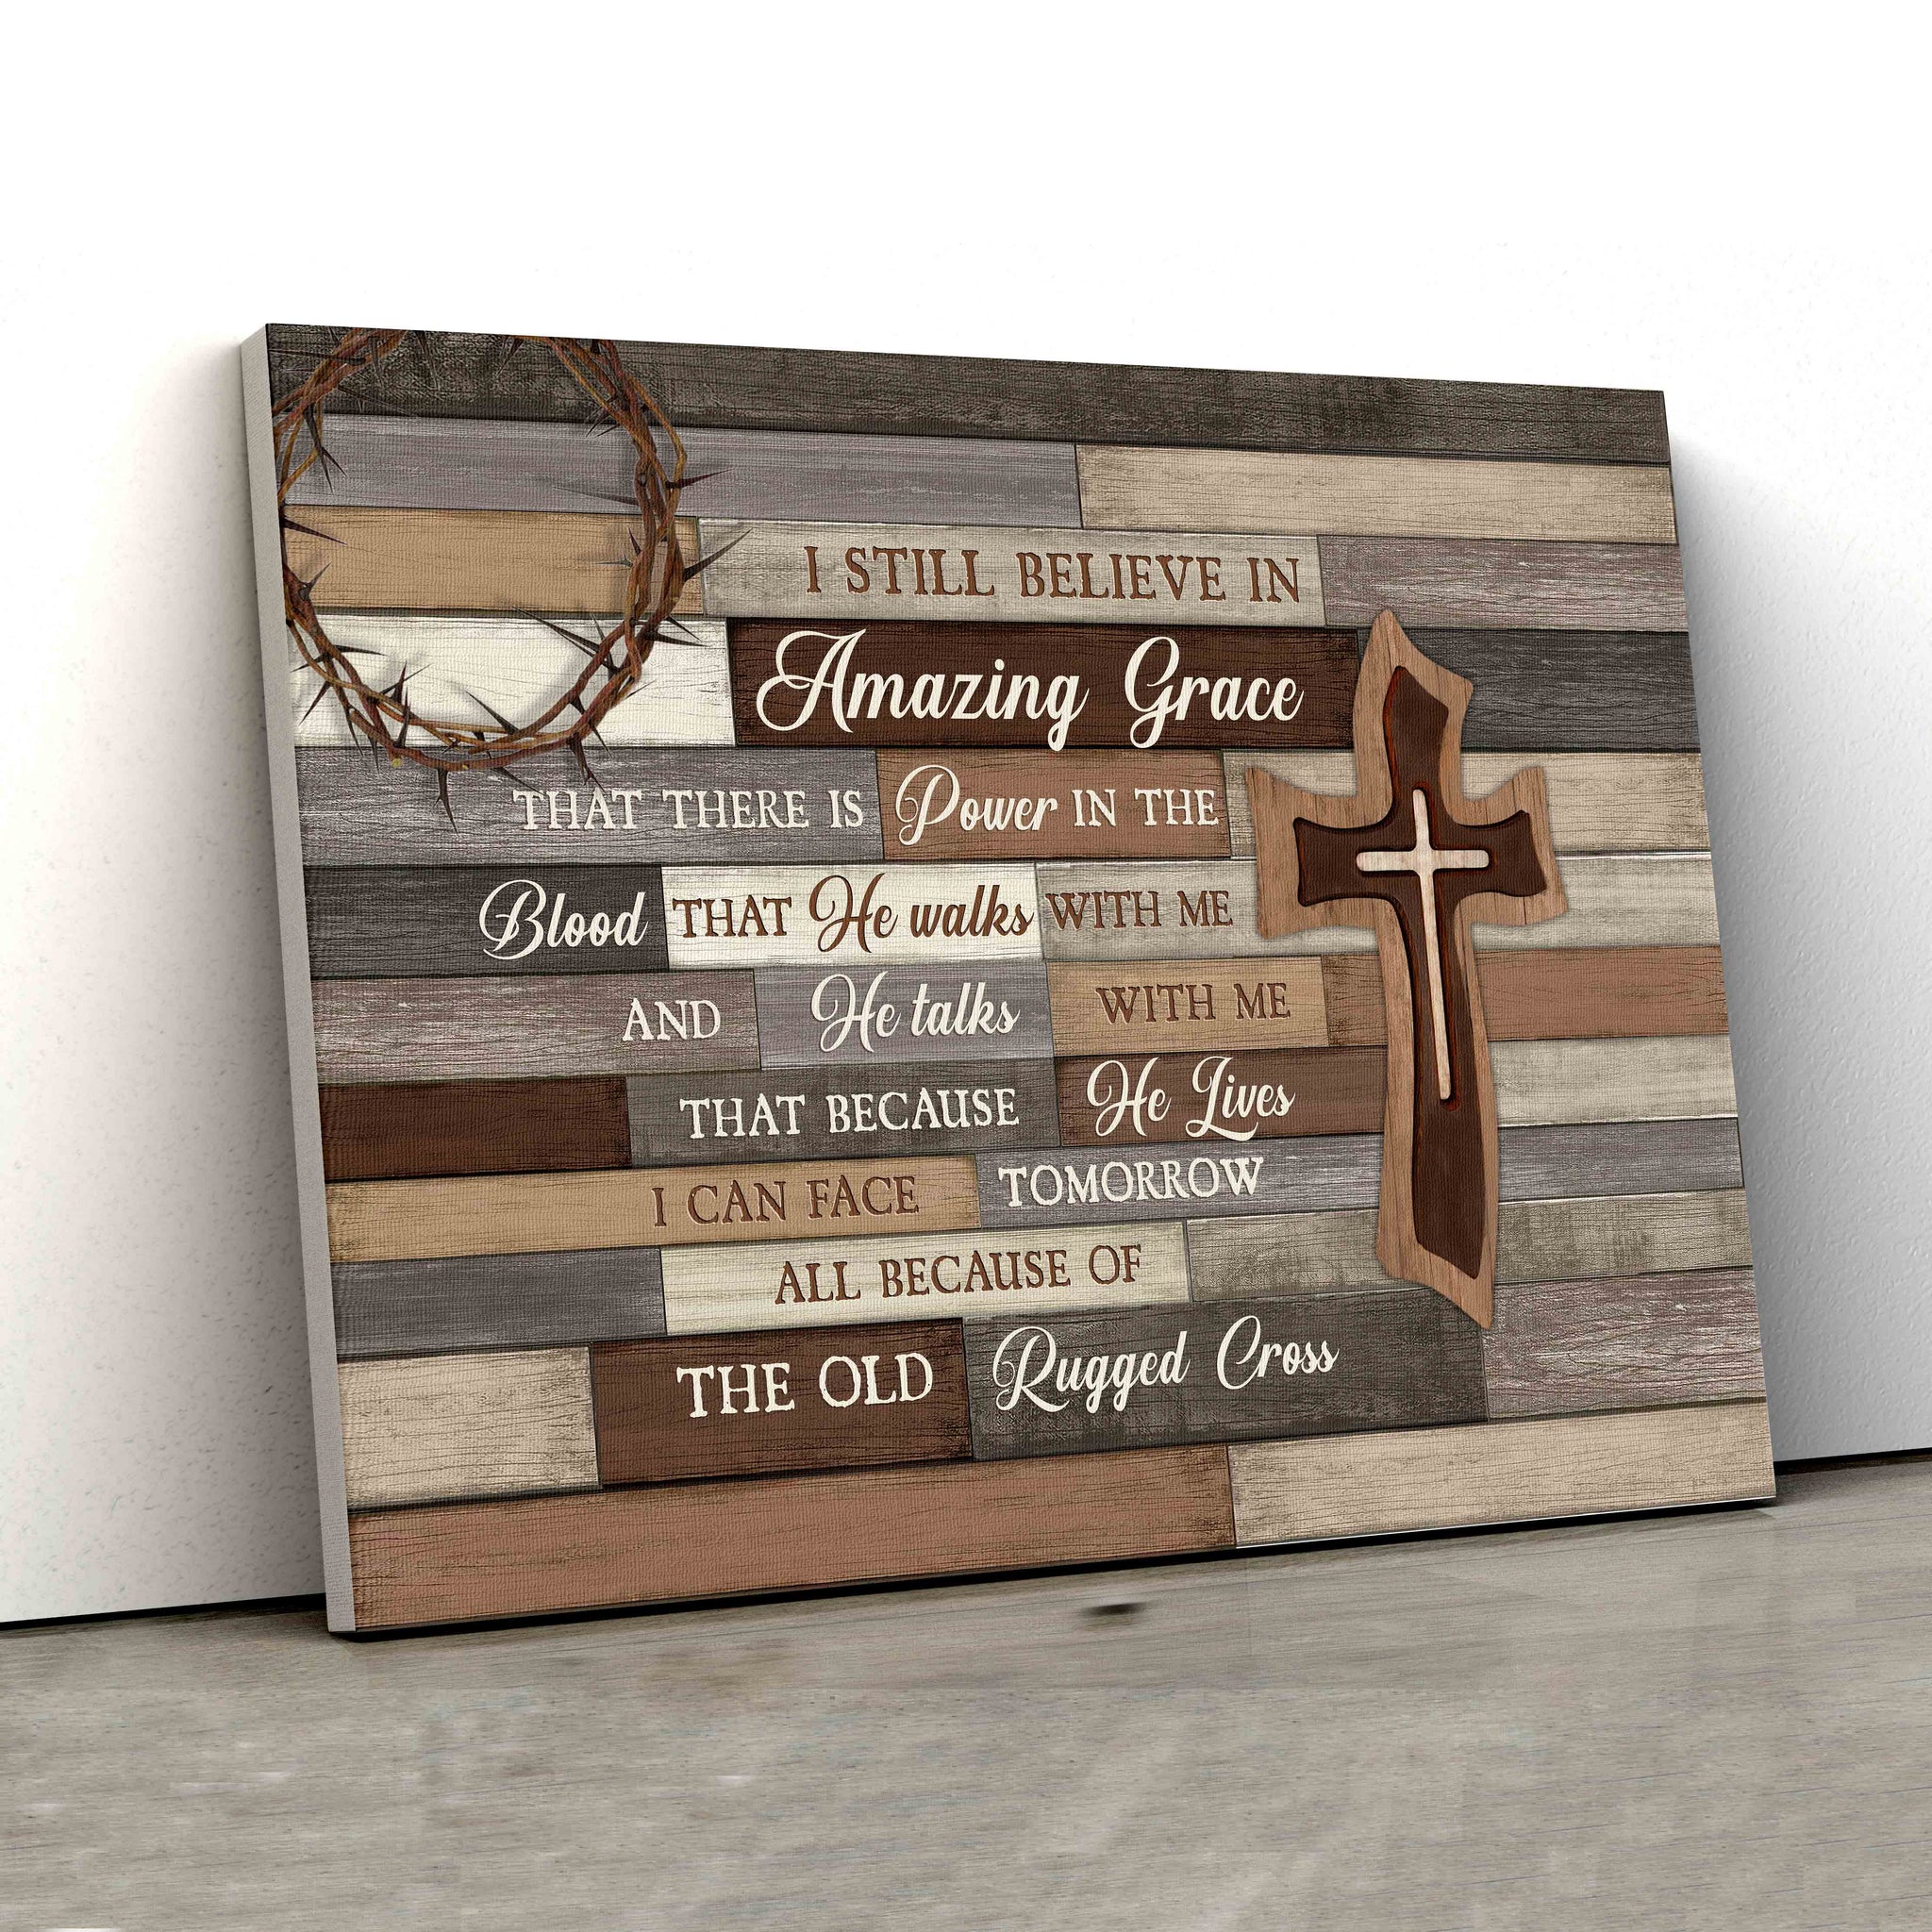 I Still Believe In Amazing Grace Canvas, Wooden Cross Canvas, Christian Wall Art Canvas, Canvas Wall Decor